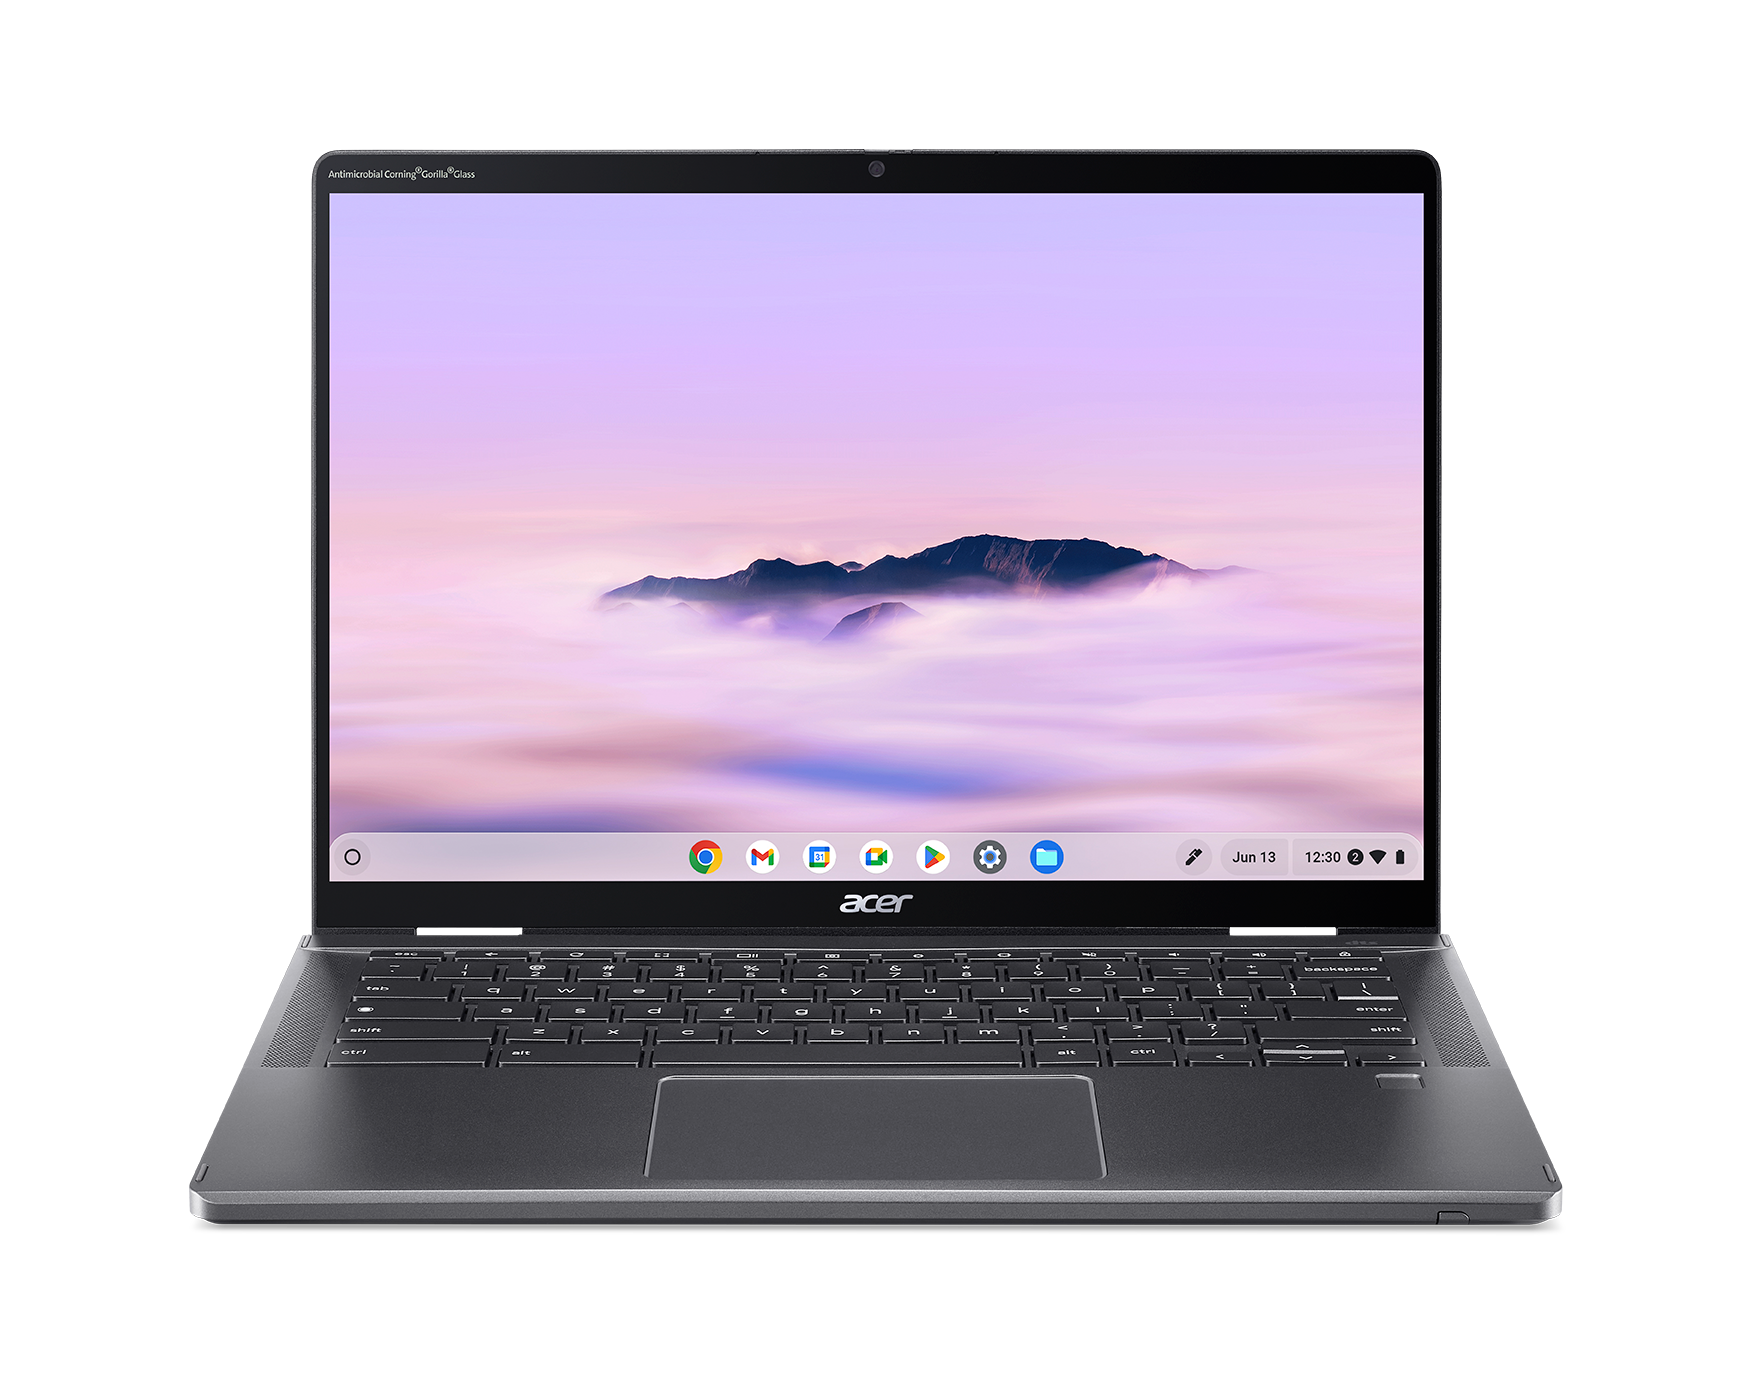 https://storage.googleapis.com/gweb-cloudblog-publish/images/Copy_of_acer-chromebook-plus-spin-714-cpe7.max-1800x1800_cNRcpwa.png